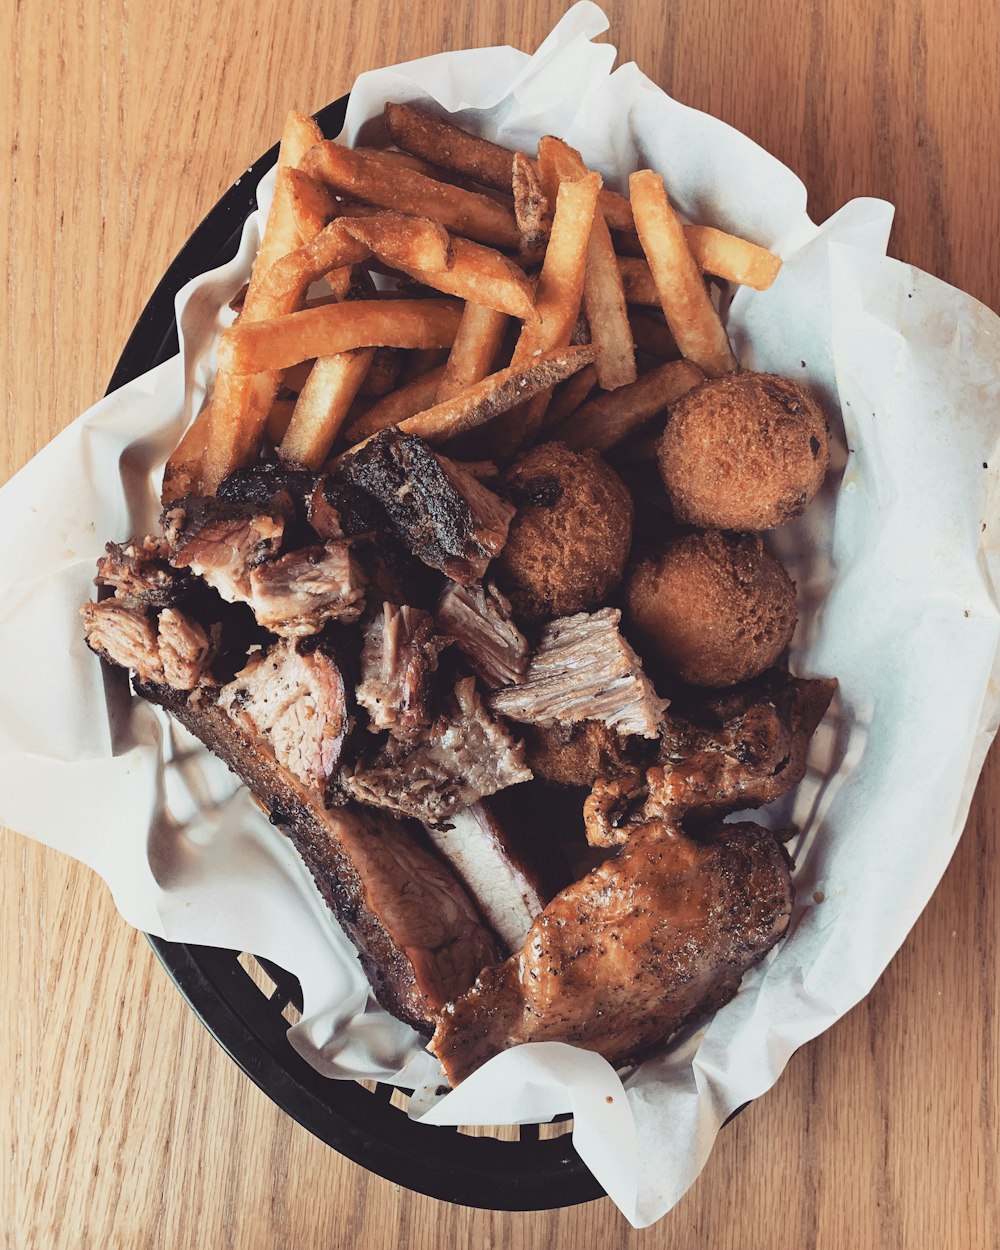 steak, meat balls, and fries in basket